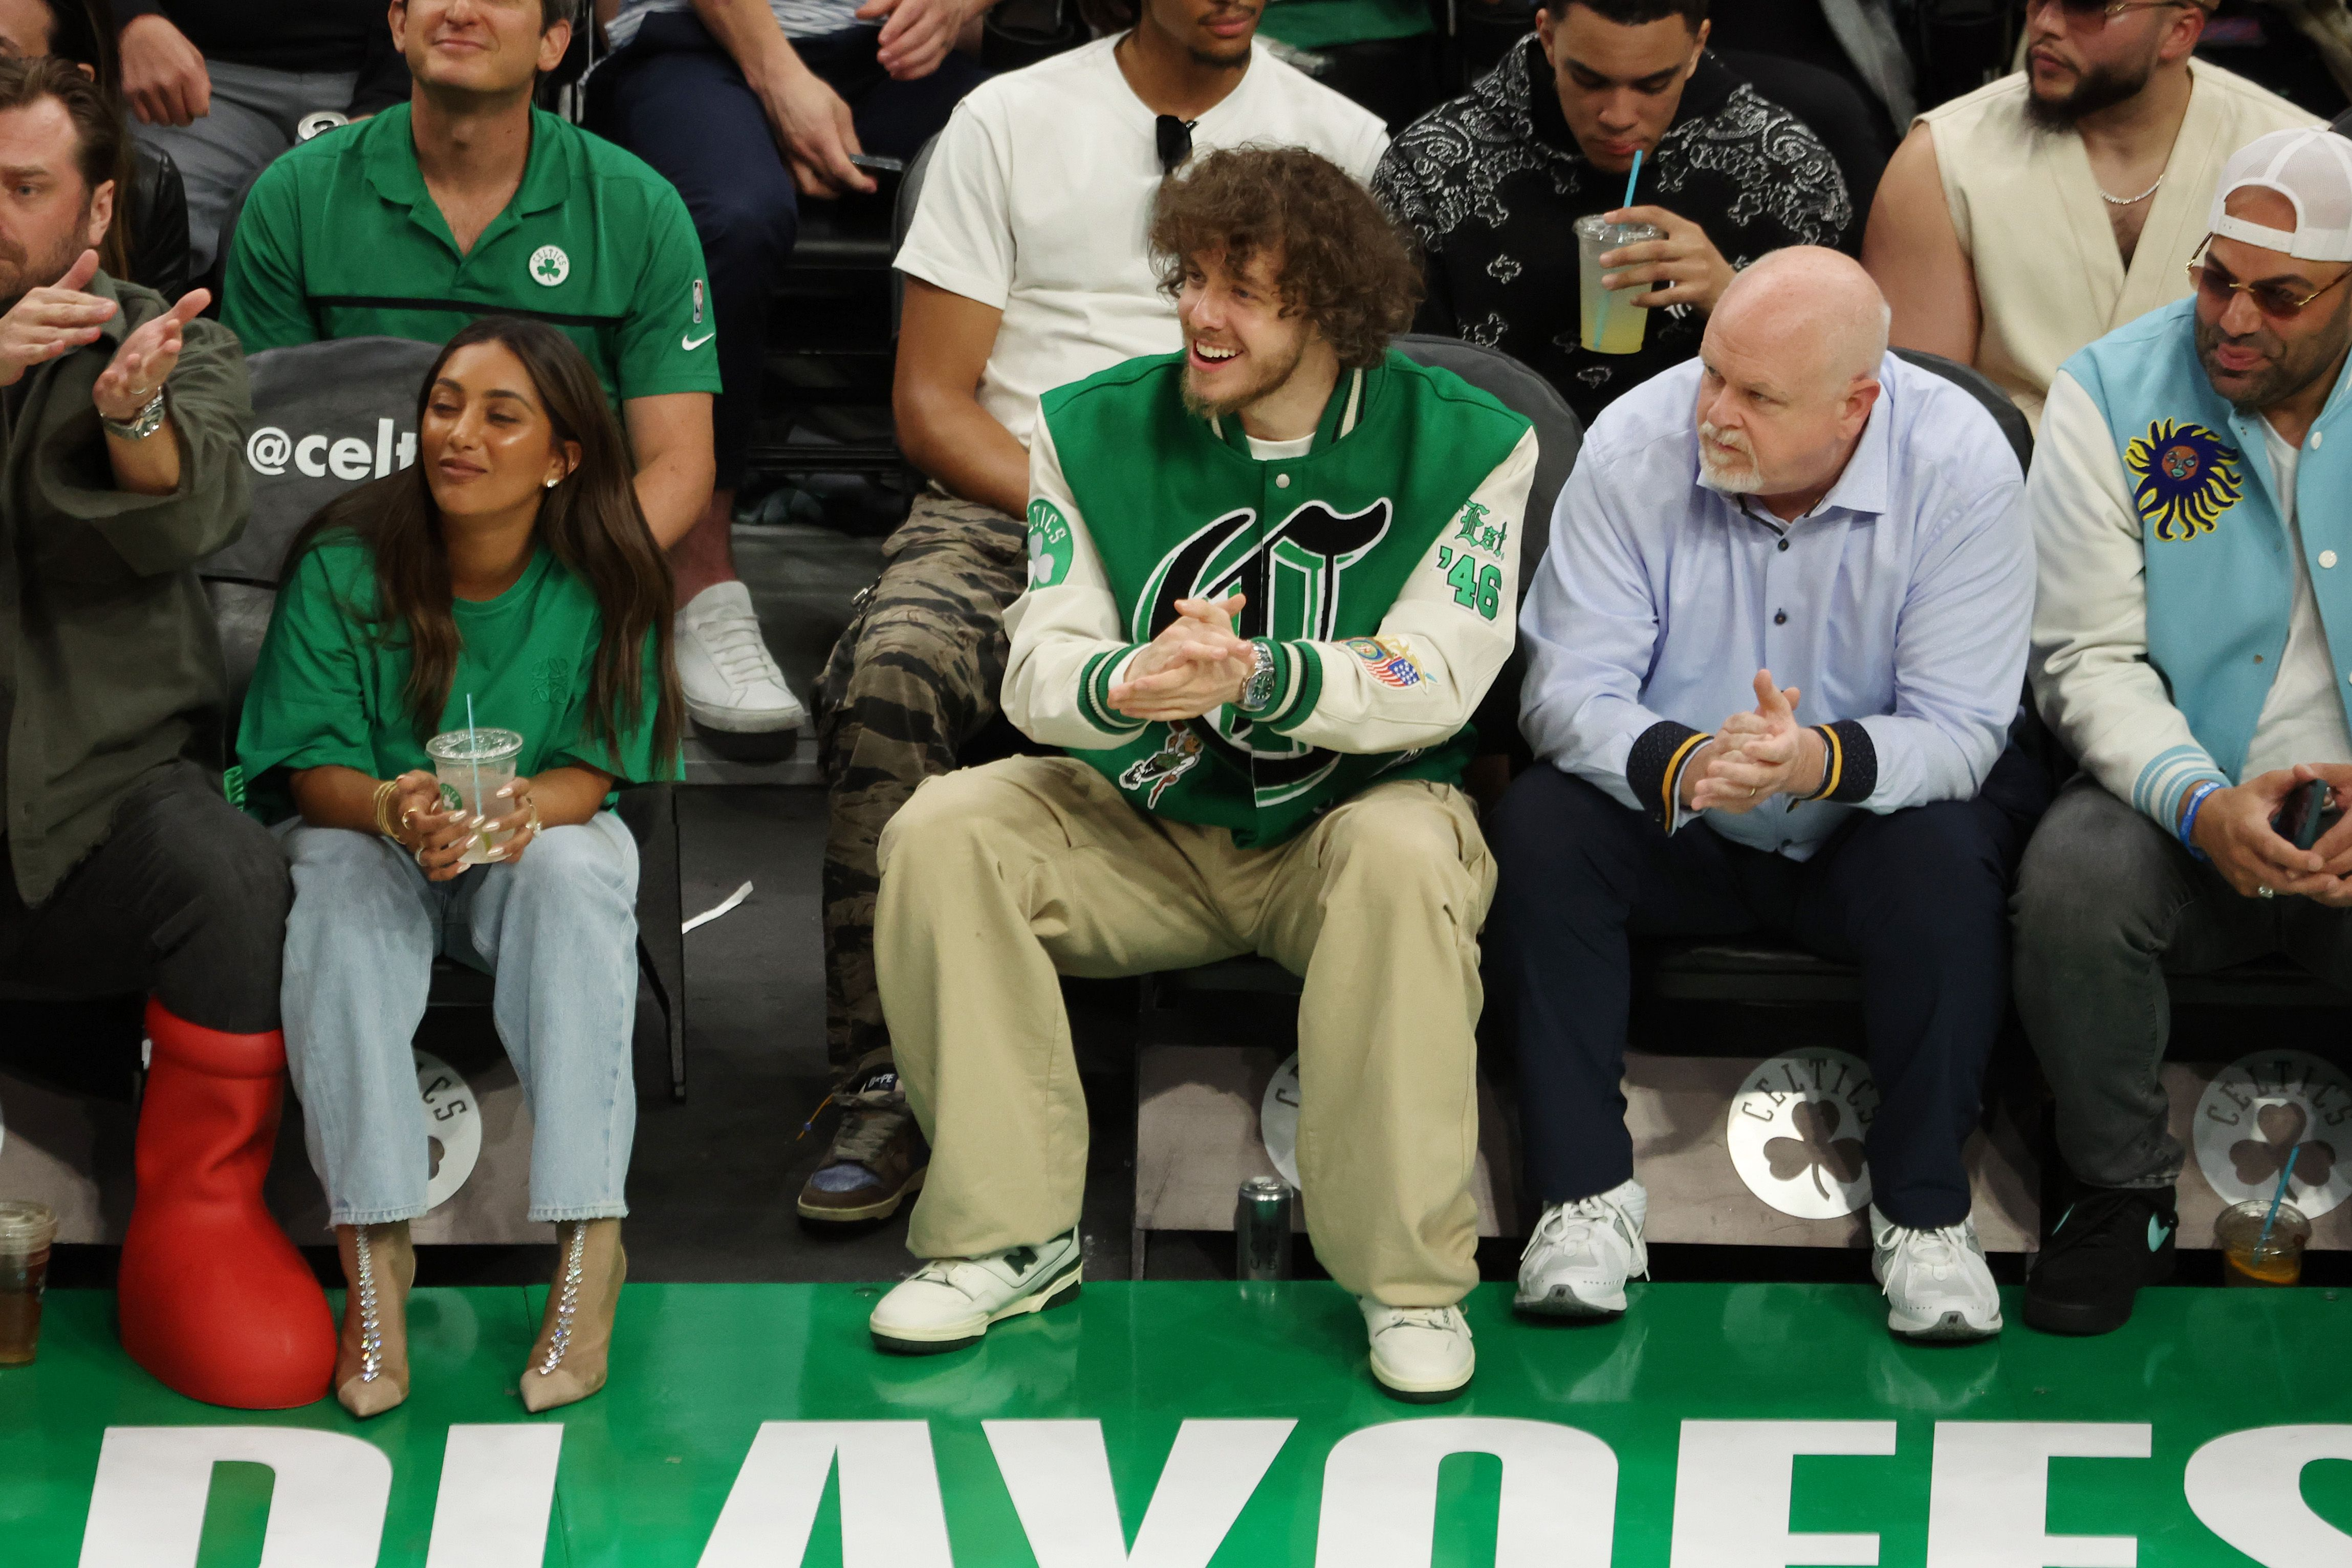 Here's which celebrities were at NBA Finals Game 3 in Boston